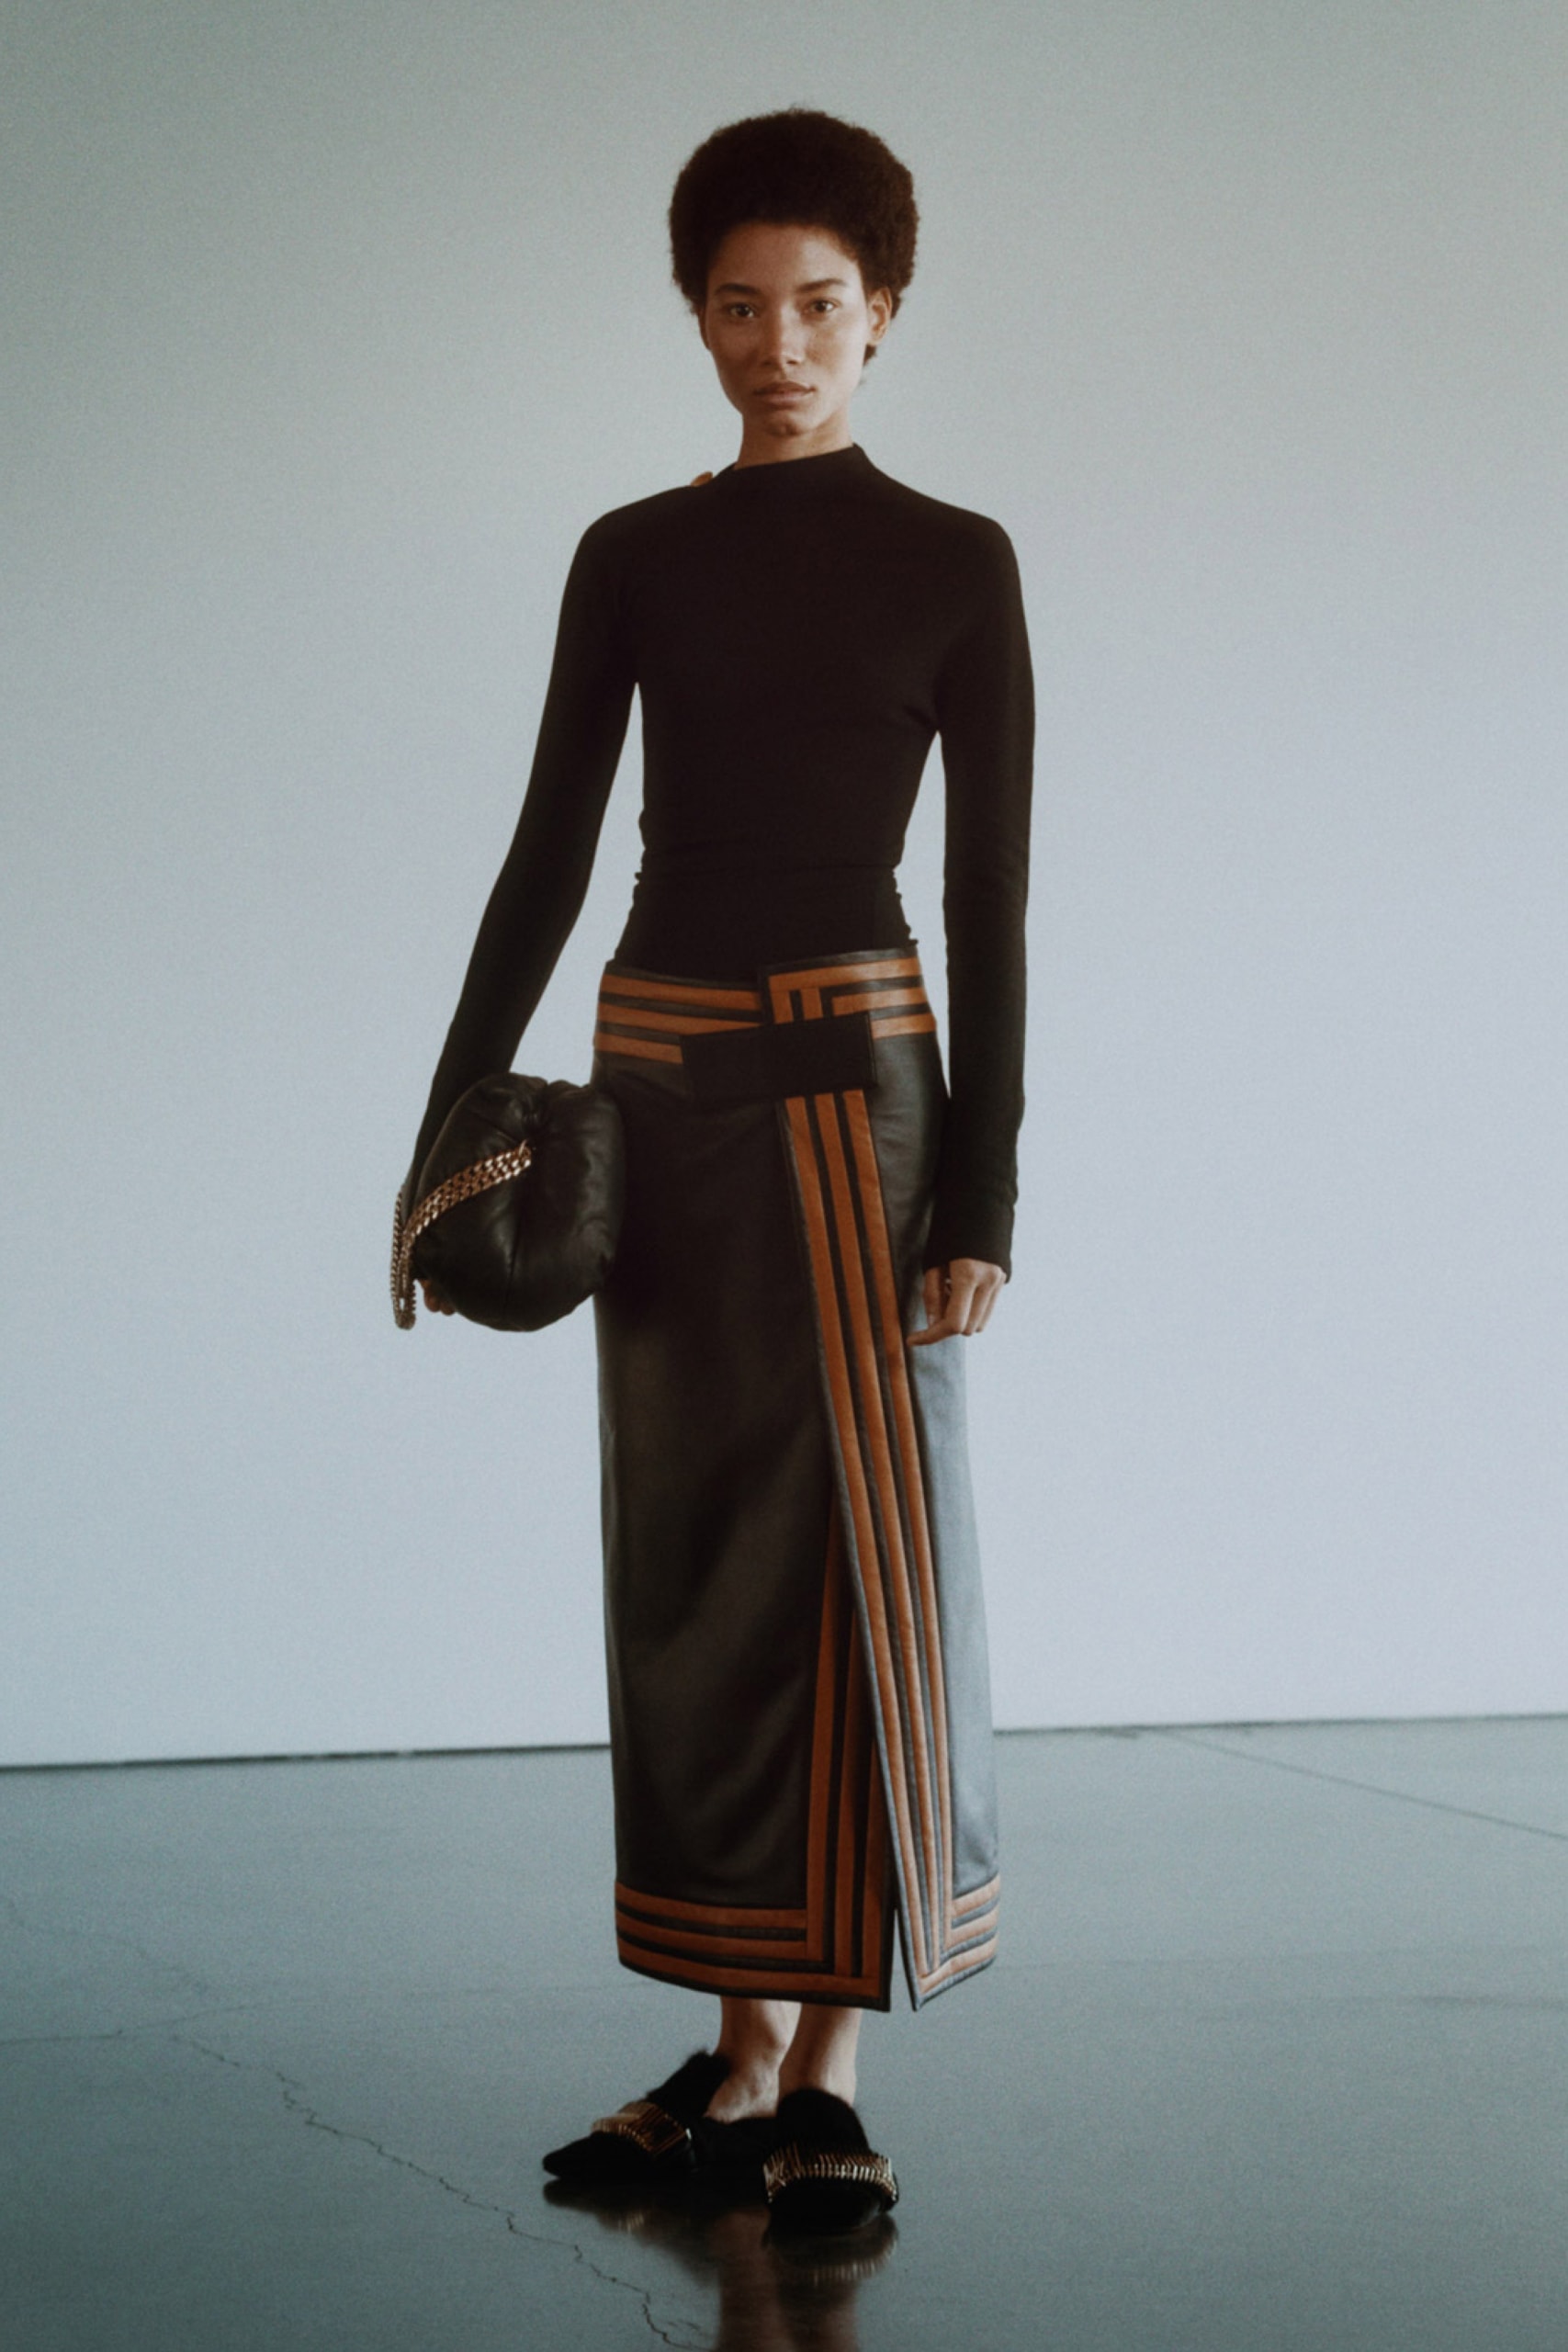 proenza schouler fall winter 2021 fw21 collection lookbook new york fashion week nyfw knit top leather skirt stripes